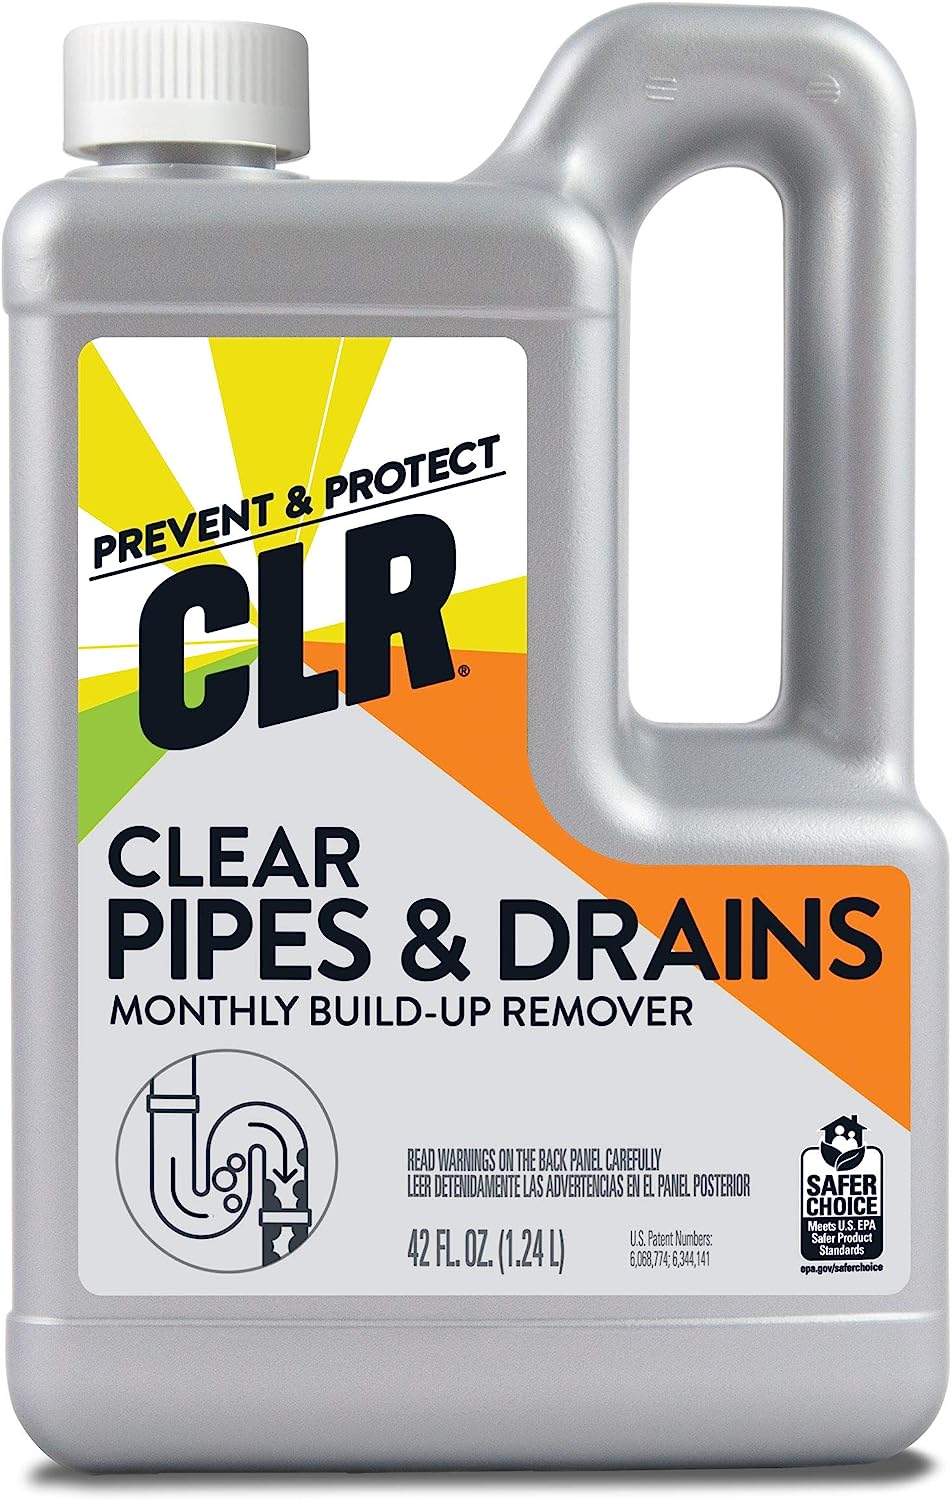 product for clogged drain detailed review